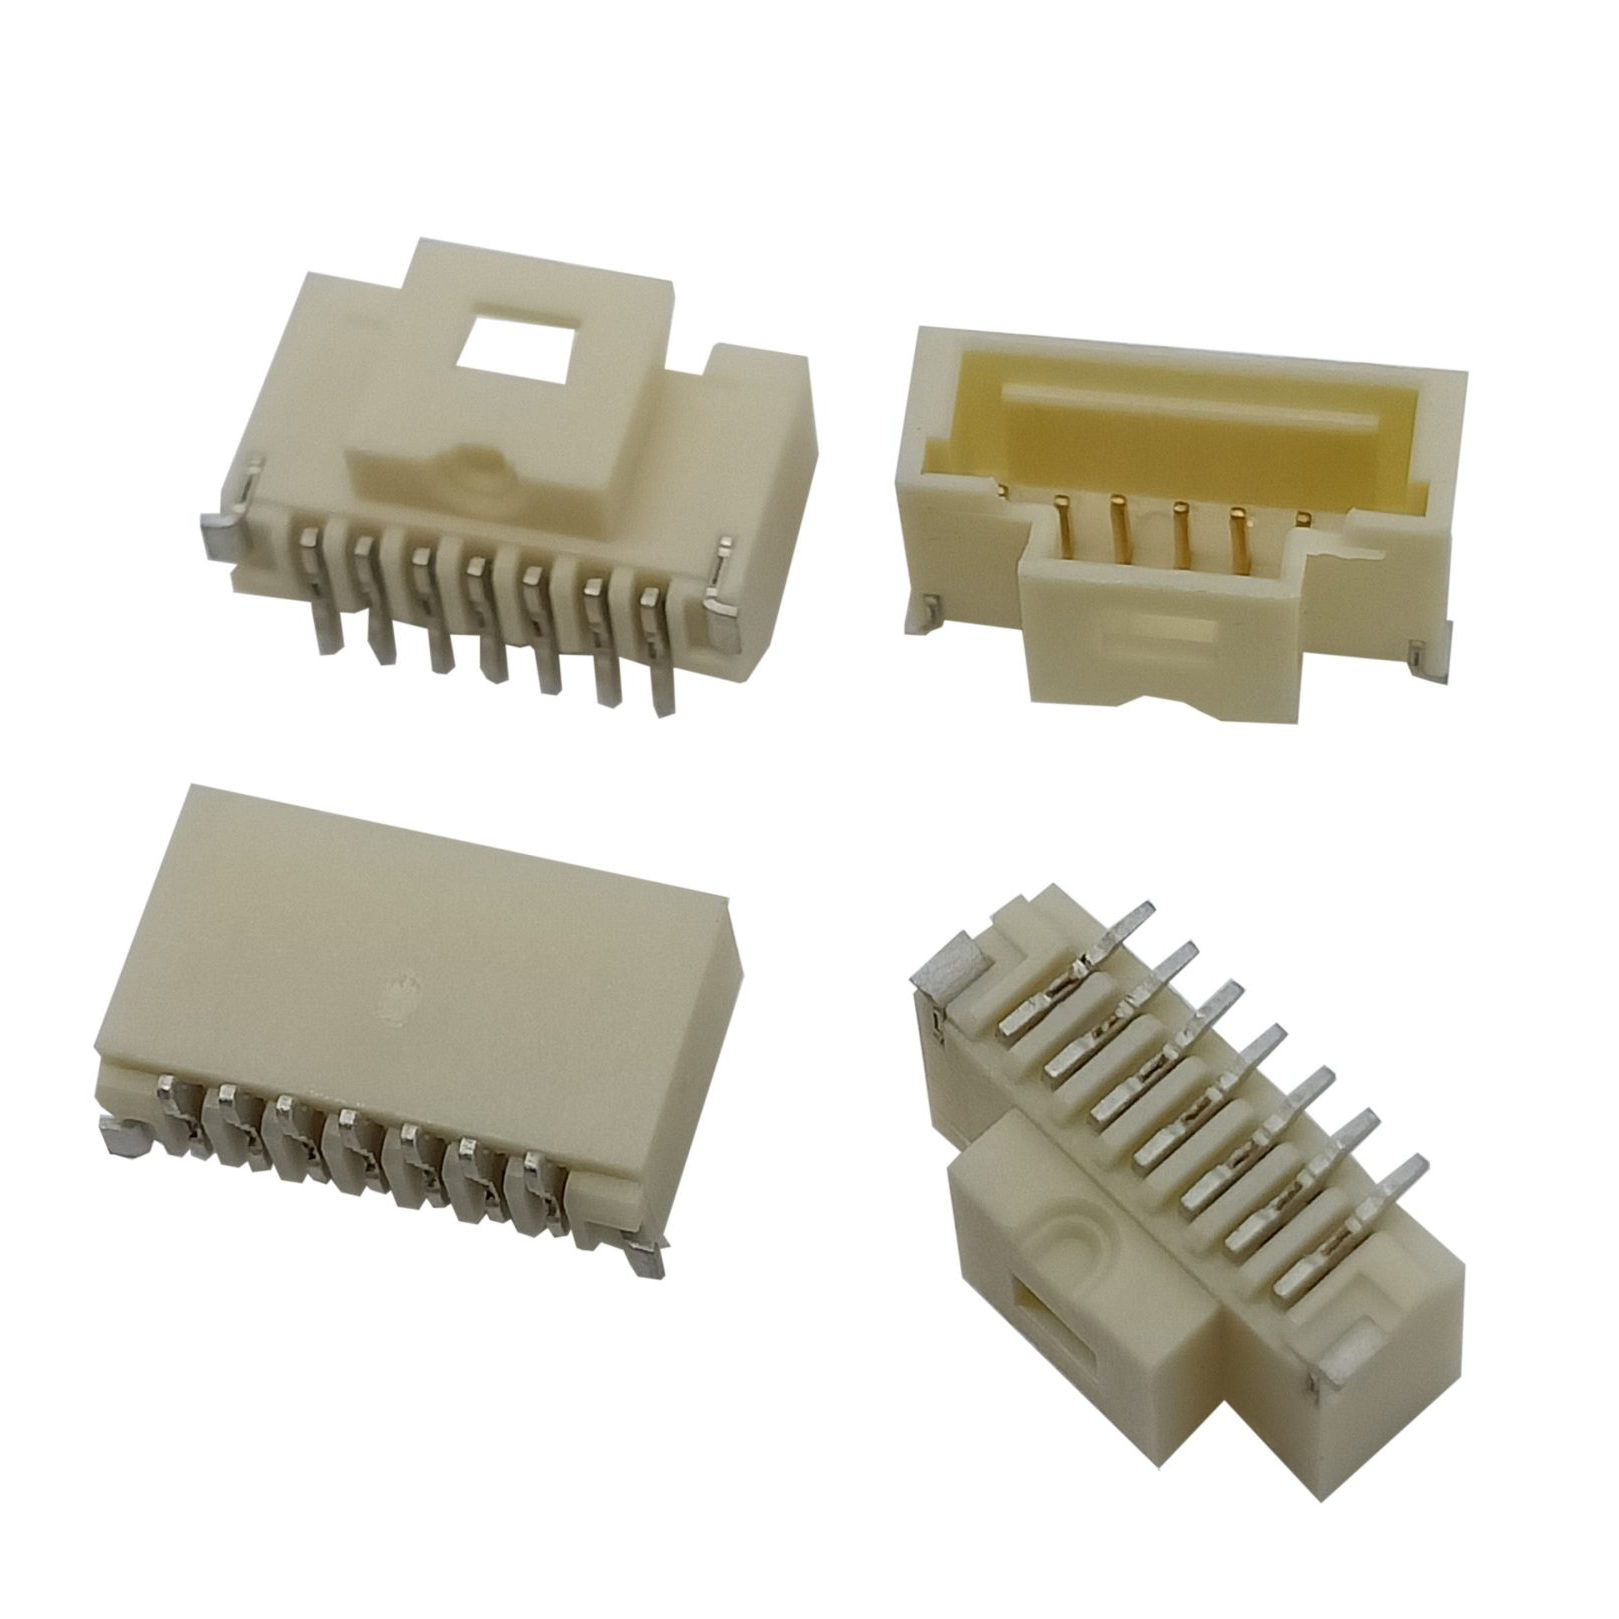 1.0mm pitch,single row,vertical,SMT,Gold plated,Friction Lock,4 Circuits,Natural,Pico-Clasp PCB Header,5044490407,5013310407, molex pcb headers